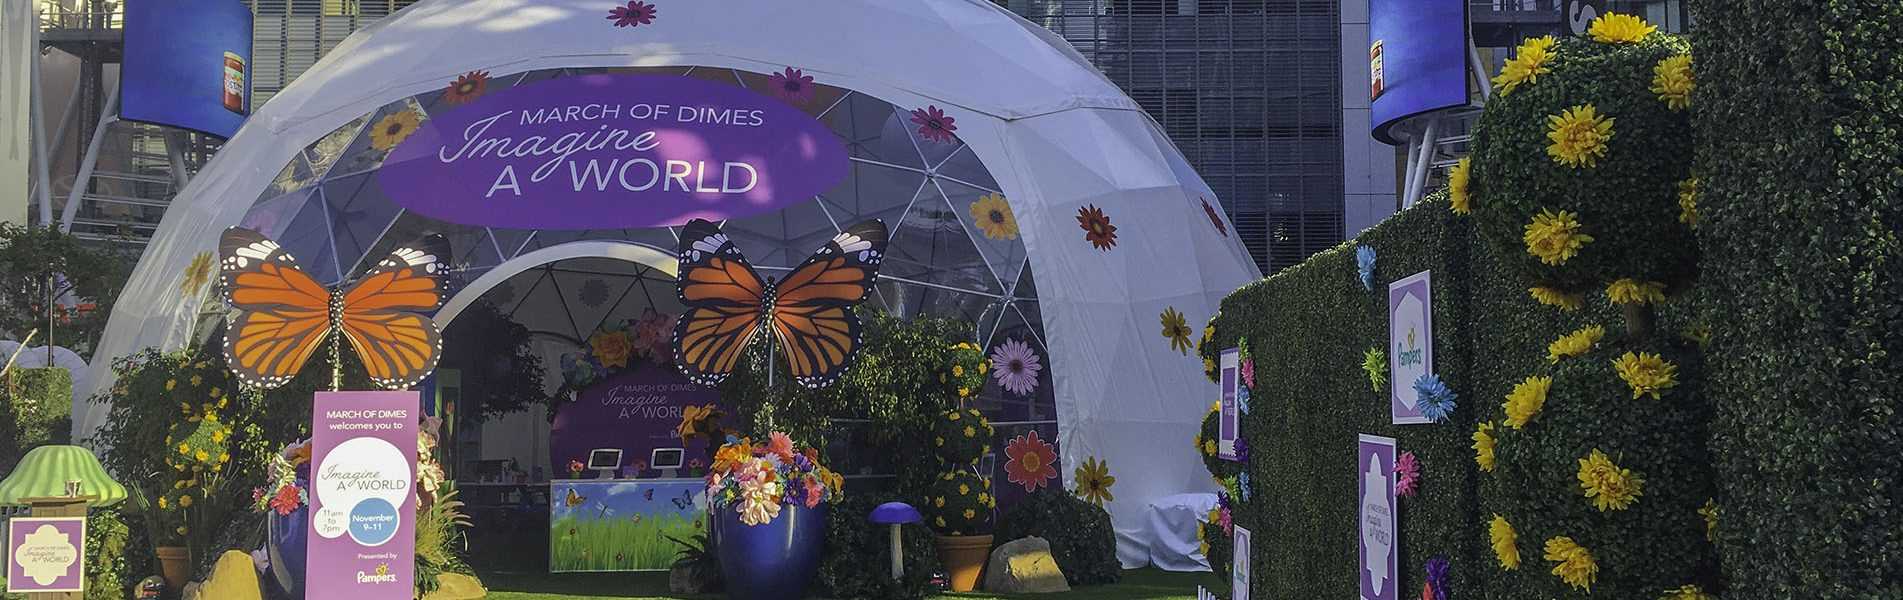 March of Dimes Dome